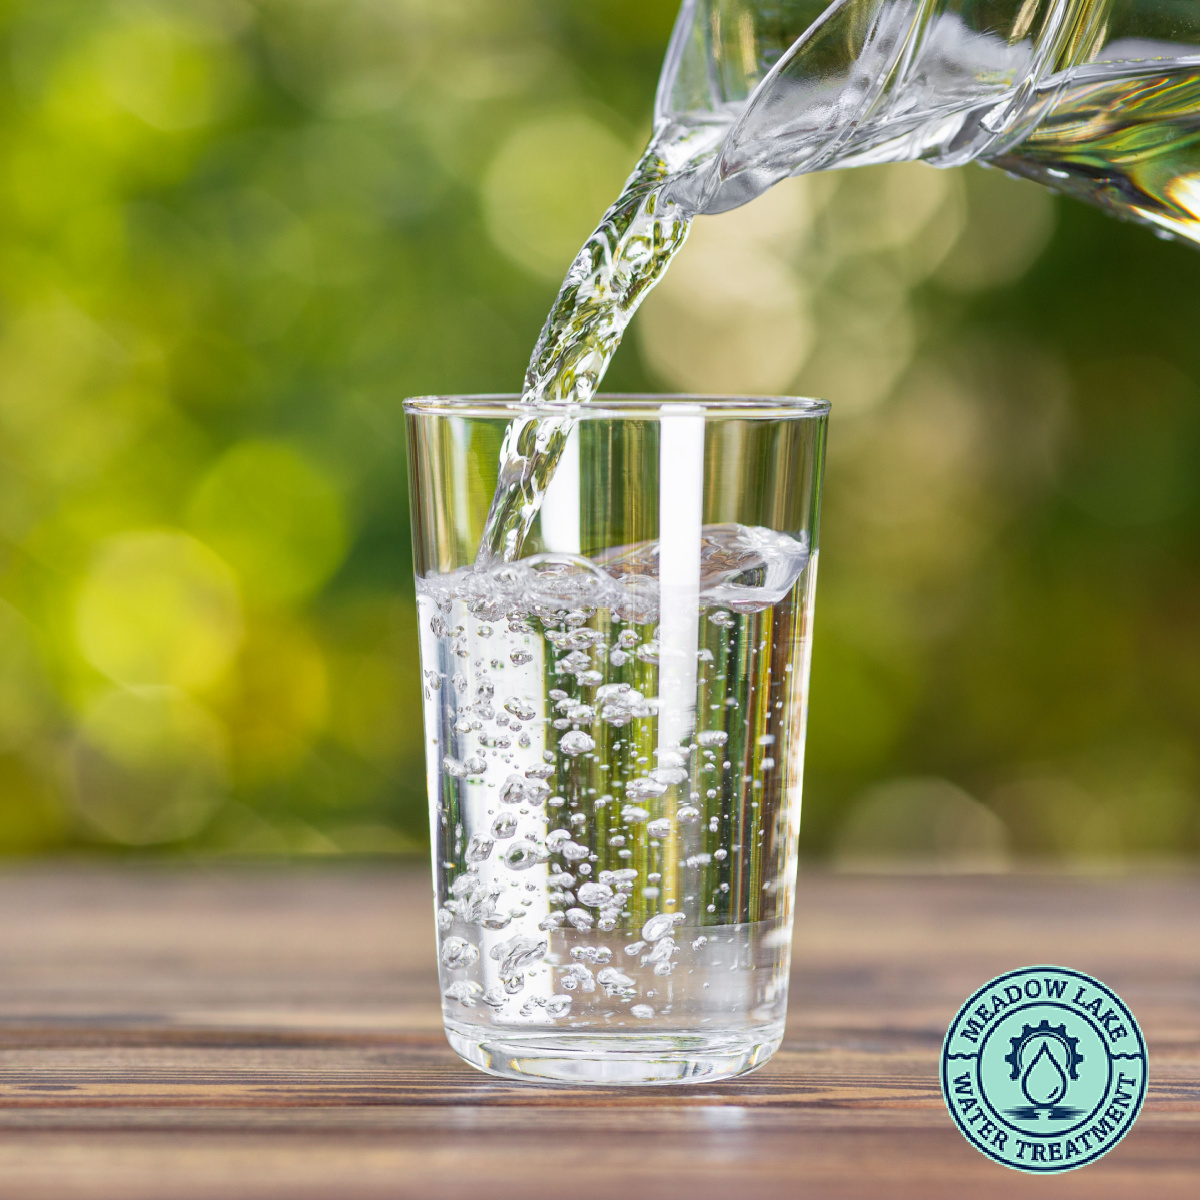 Meadow Lake Water Treatment: Your Trusted Drinking Water System Provider in Mill Creek